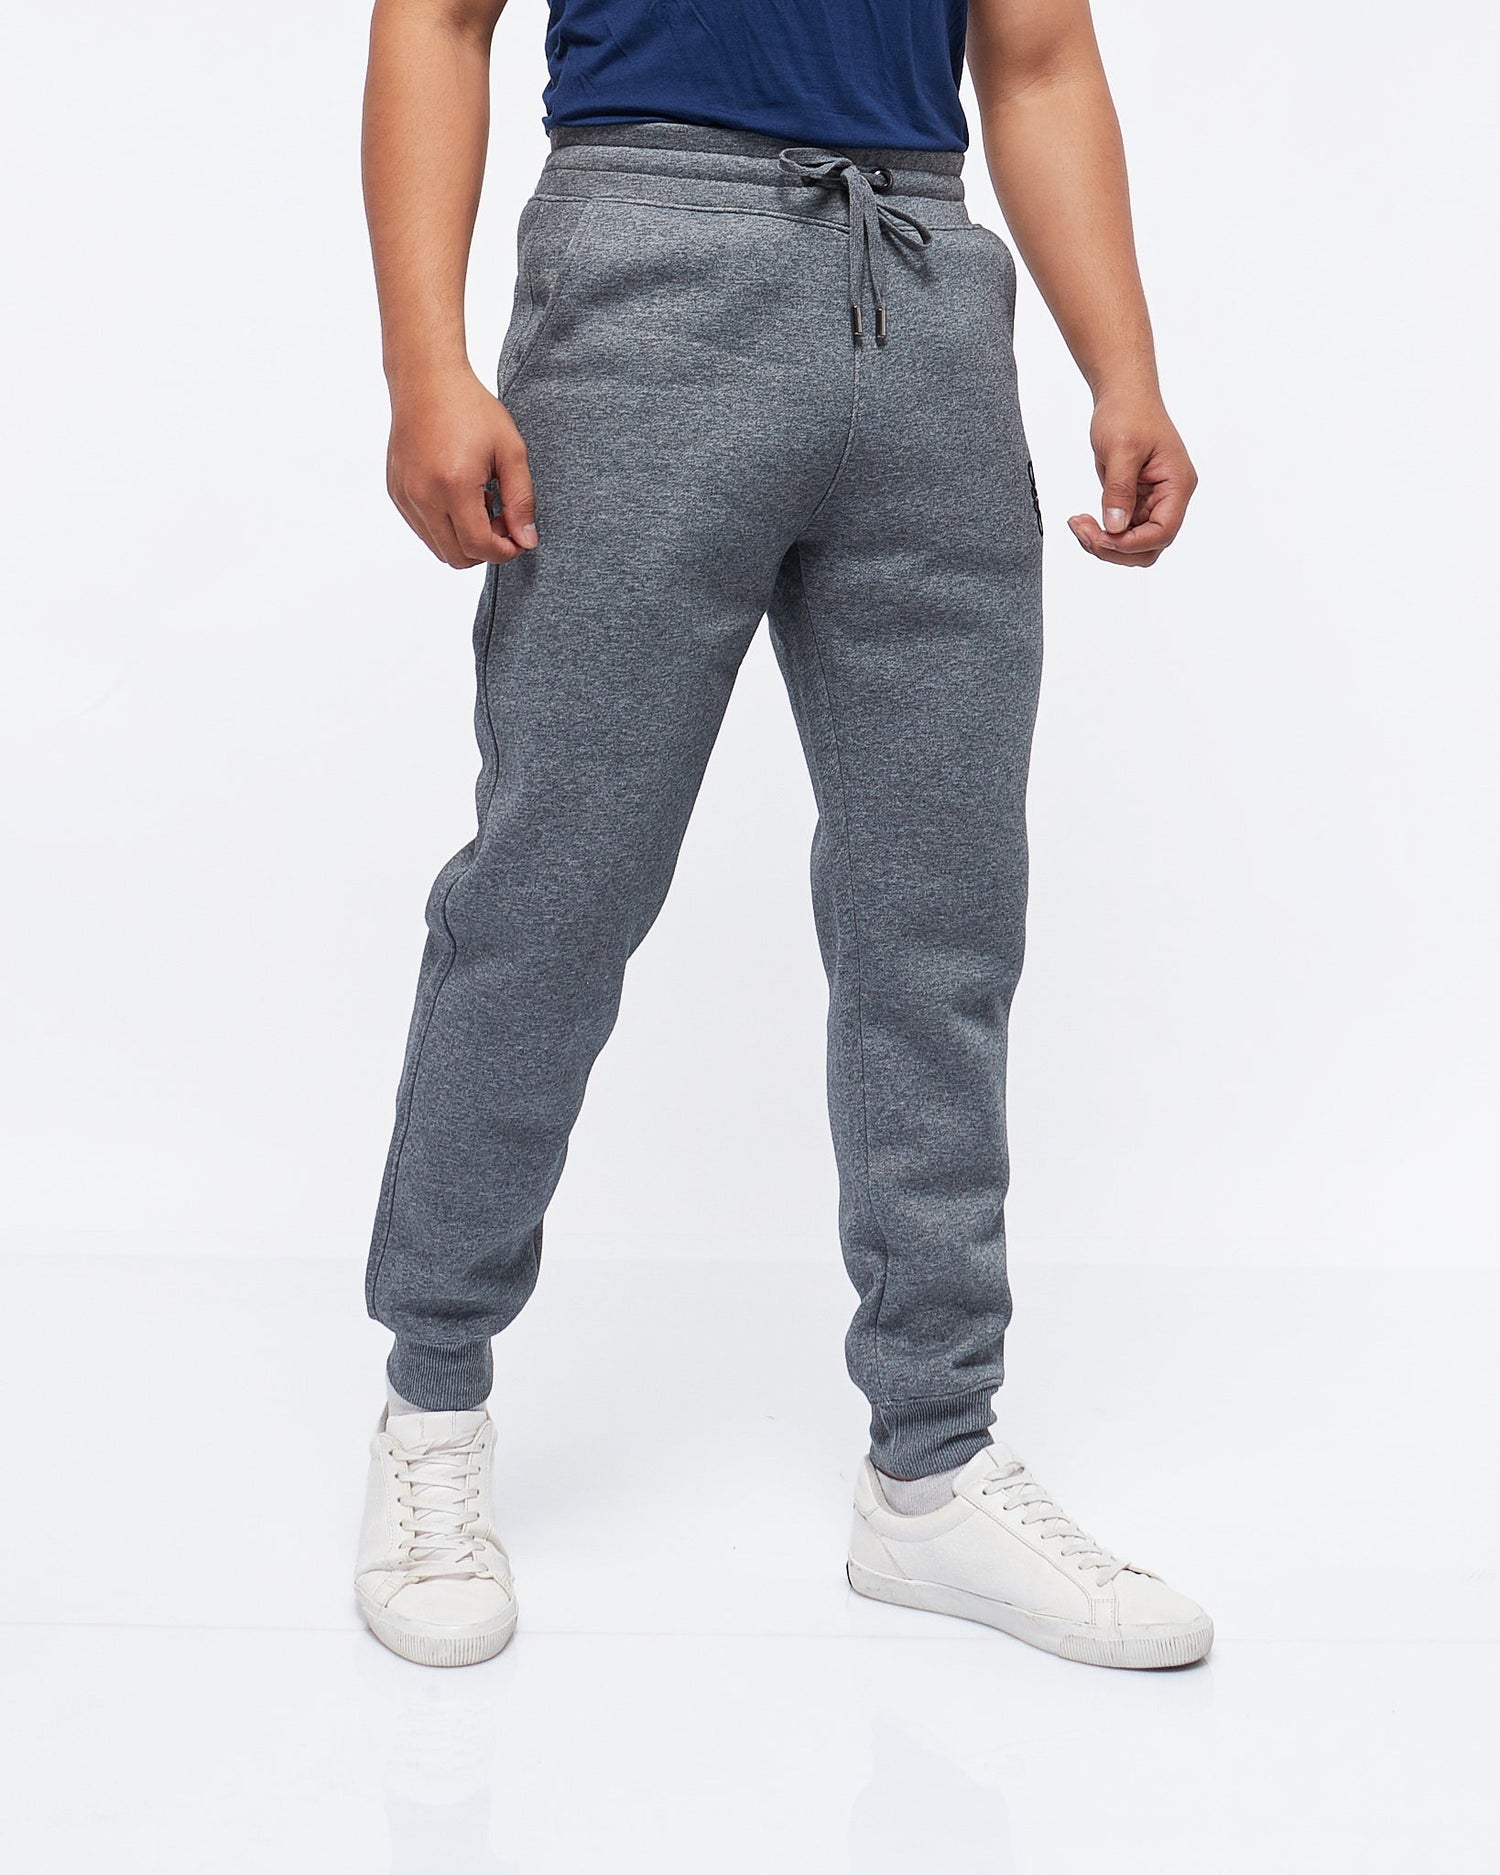 MOI OUTFIT-Loewe Logo Embroidered Men Jogger 38.90